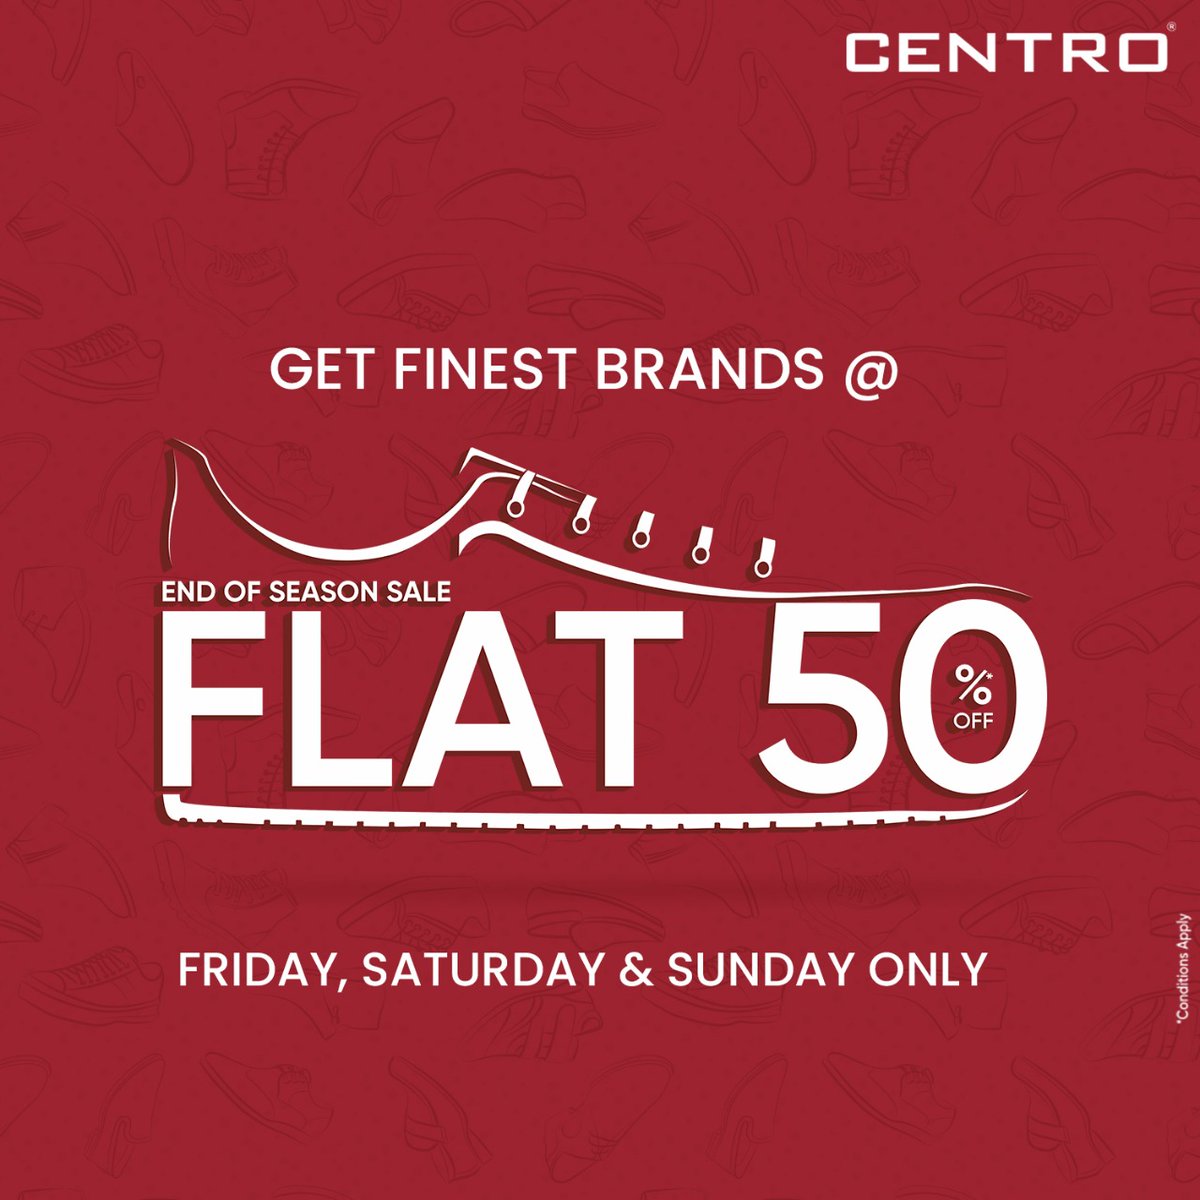 Party hard with fashion on your feet! Shop stylish shoes at flat 50% off from 30th Dec - 1st Jan.

Visit your nearest Centro store today!

#centro #centroshoesindia #eoss #sale #footwearsale #shoesale #EndofSeasonSale #shoes #centroshoes #stylishshoes #endofseason #endofyearsale